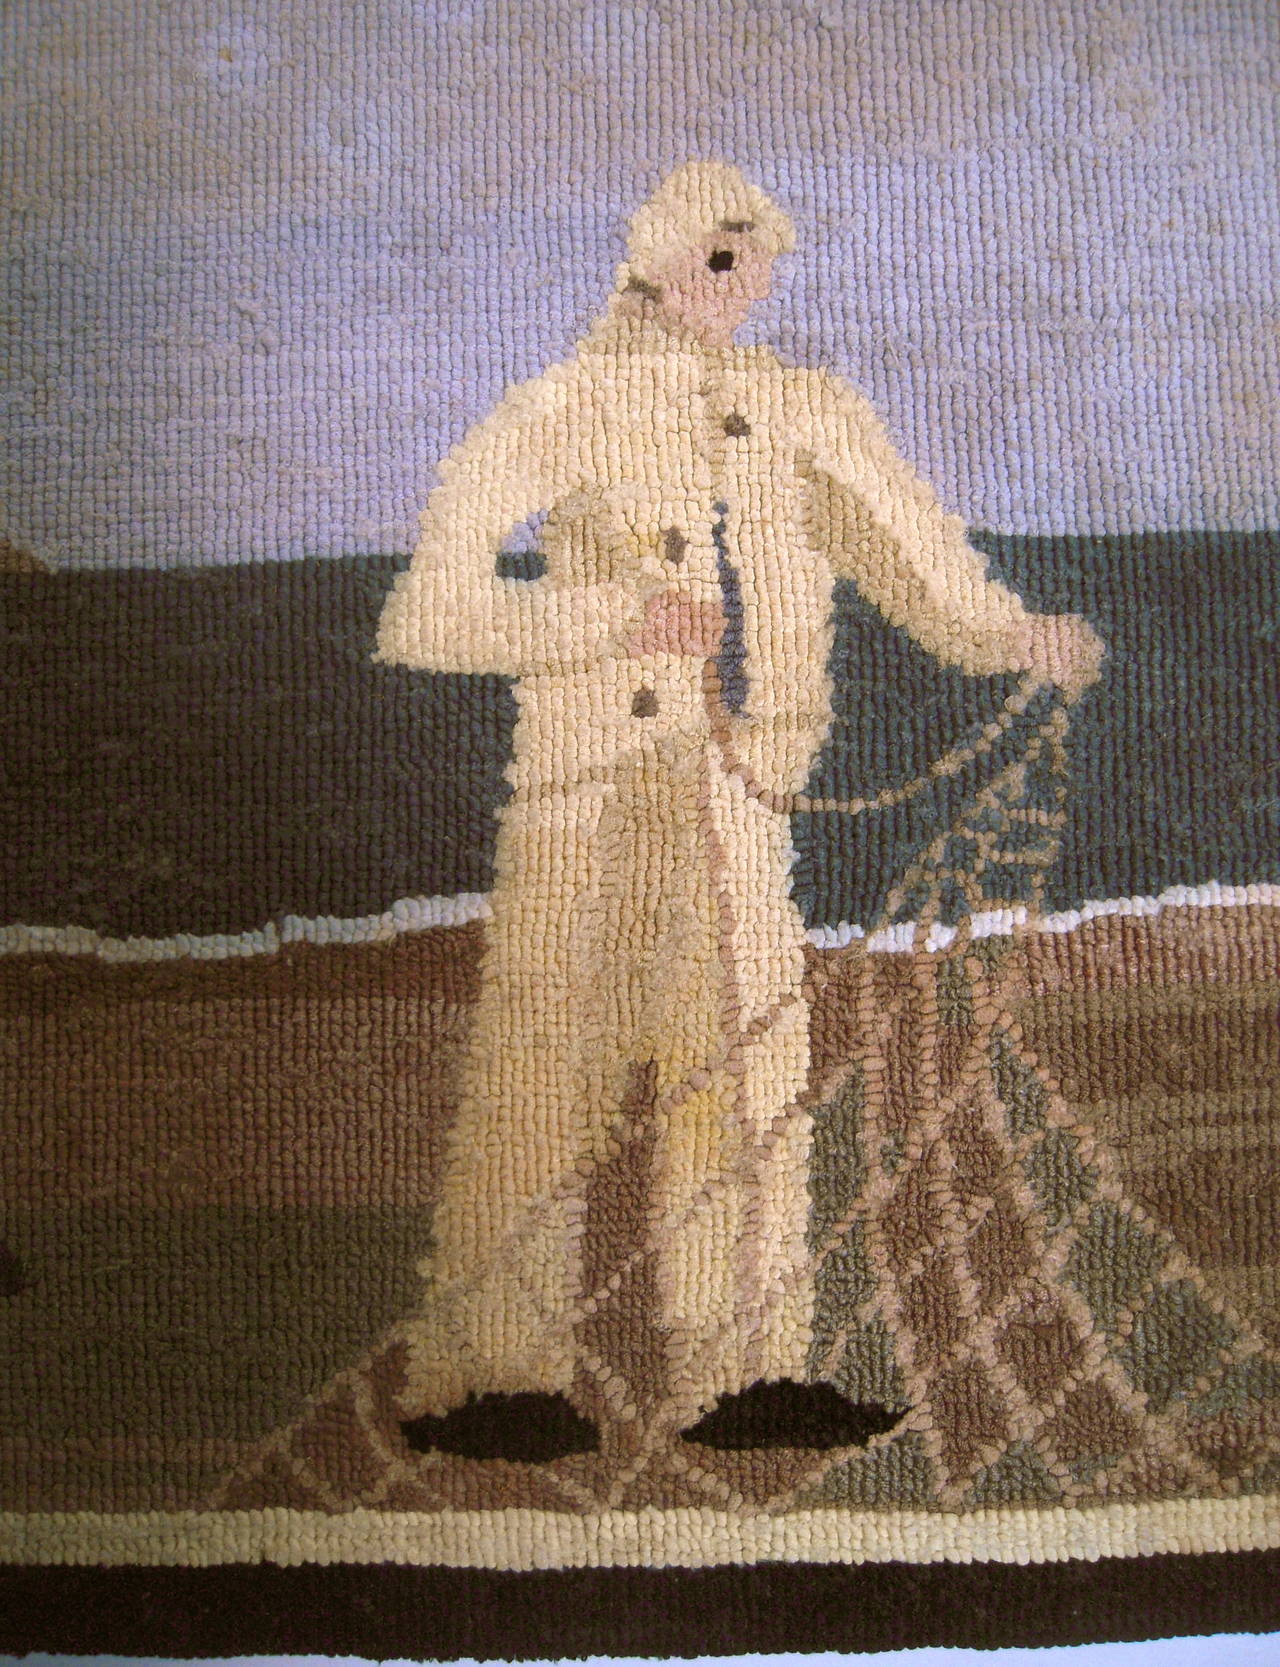 A folk art Grenfell fisherman hooked mat by the Grenfell Labrador Industries, Newfoundland and Labrador, early 20th century, composed of bleached and dyed cotton and silk strips hooked onto a burlap support, depicting a fisherman, gathering or